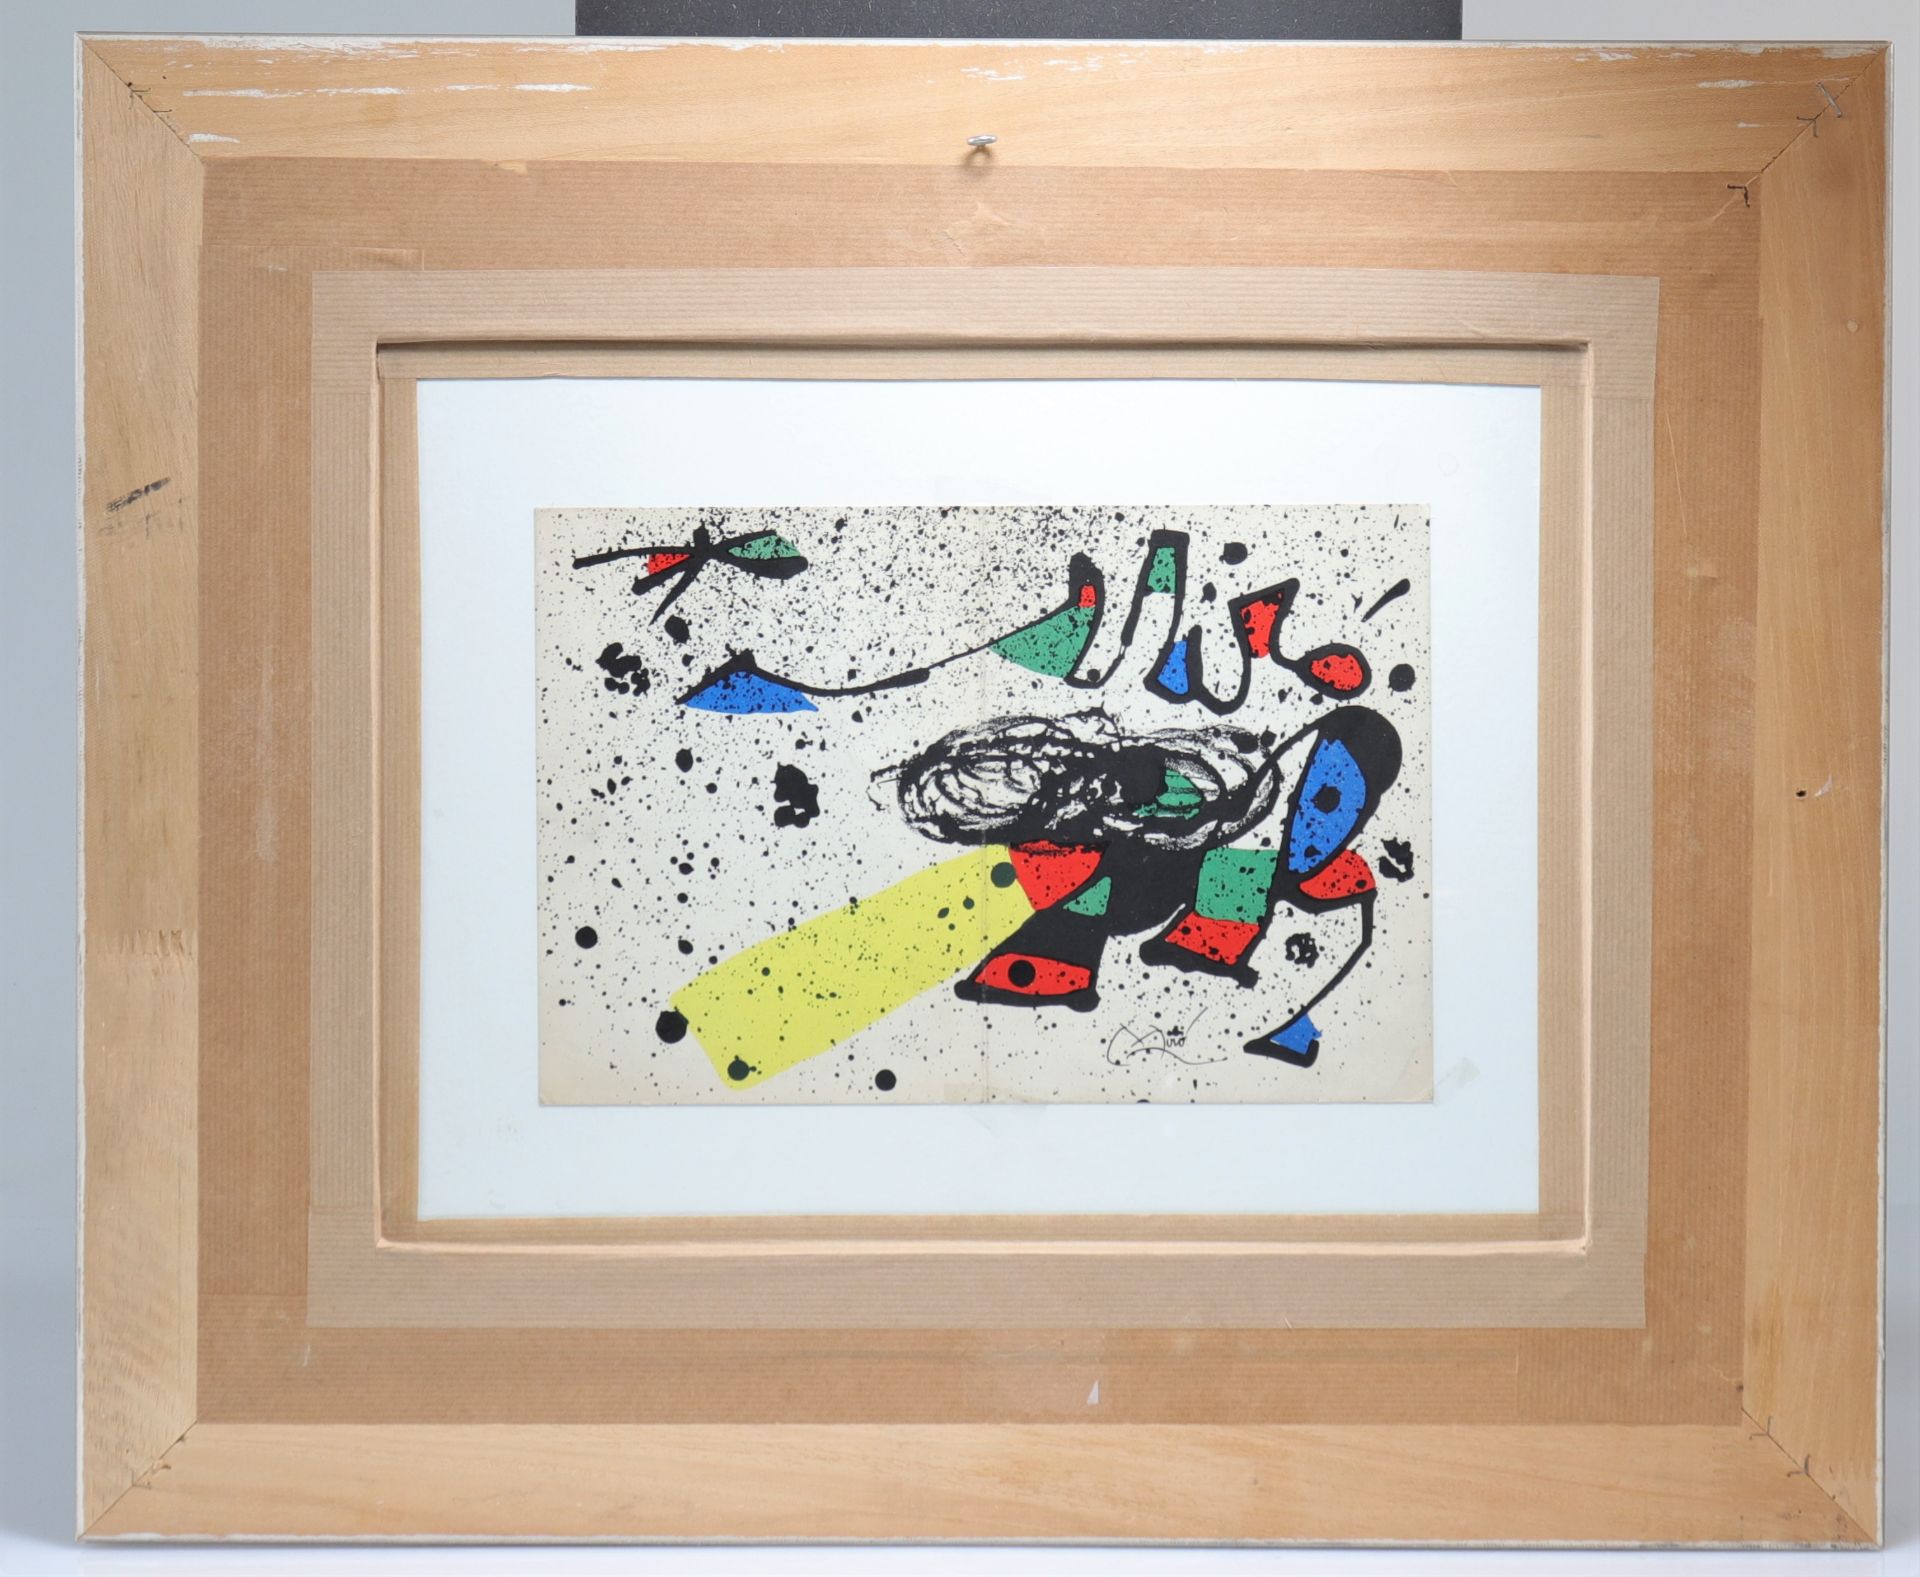 Joan Miro. Drawing in ink and colored pencils on an invitation card from the Maeght Gallery of May 1 - Image 2 of 3